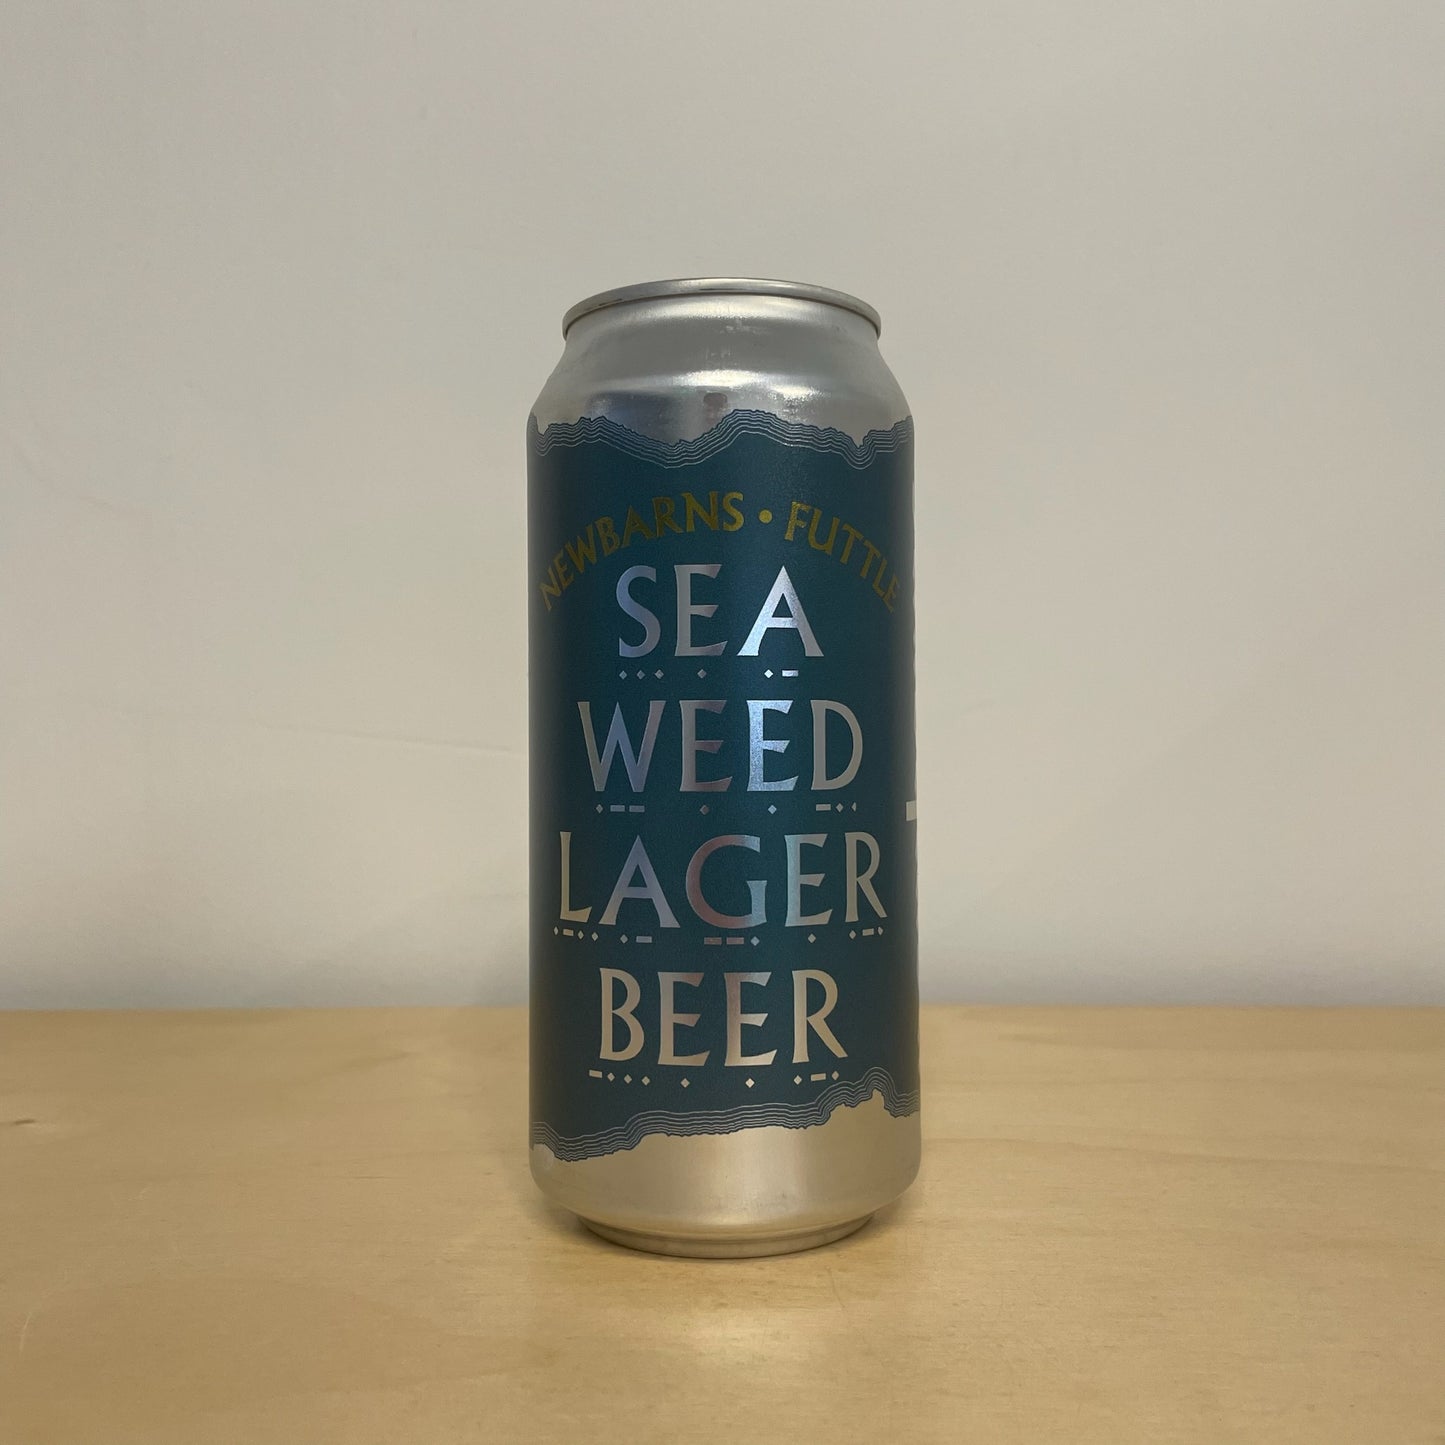 Newbarns x Futtle Seaweed Lager Beer (440ml Can)